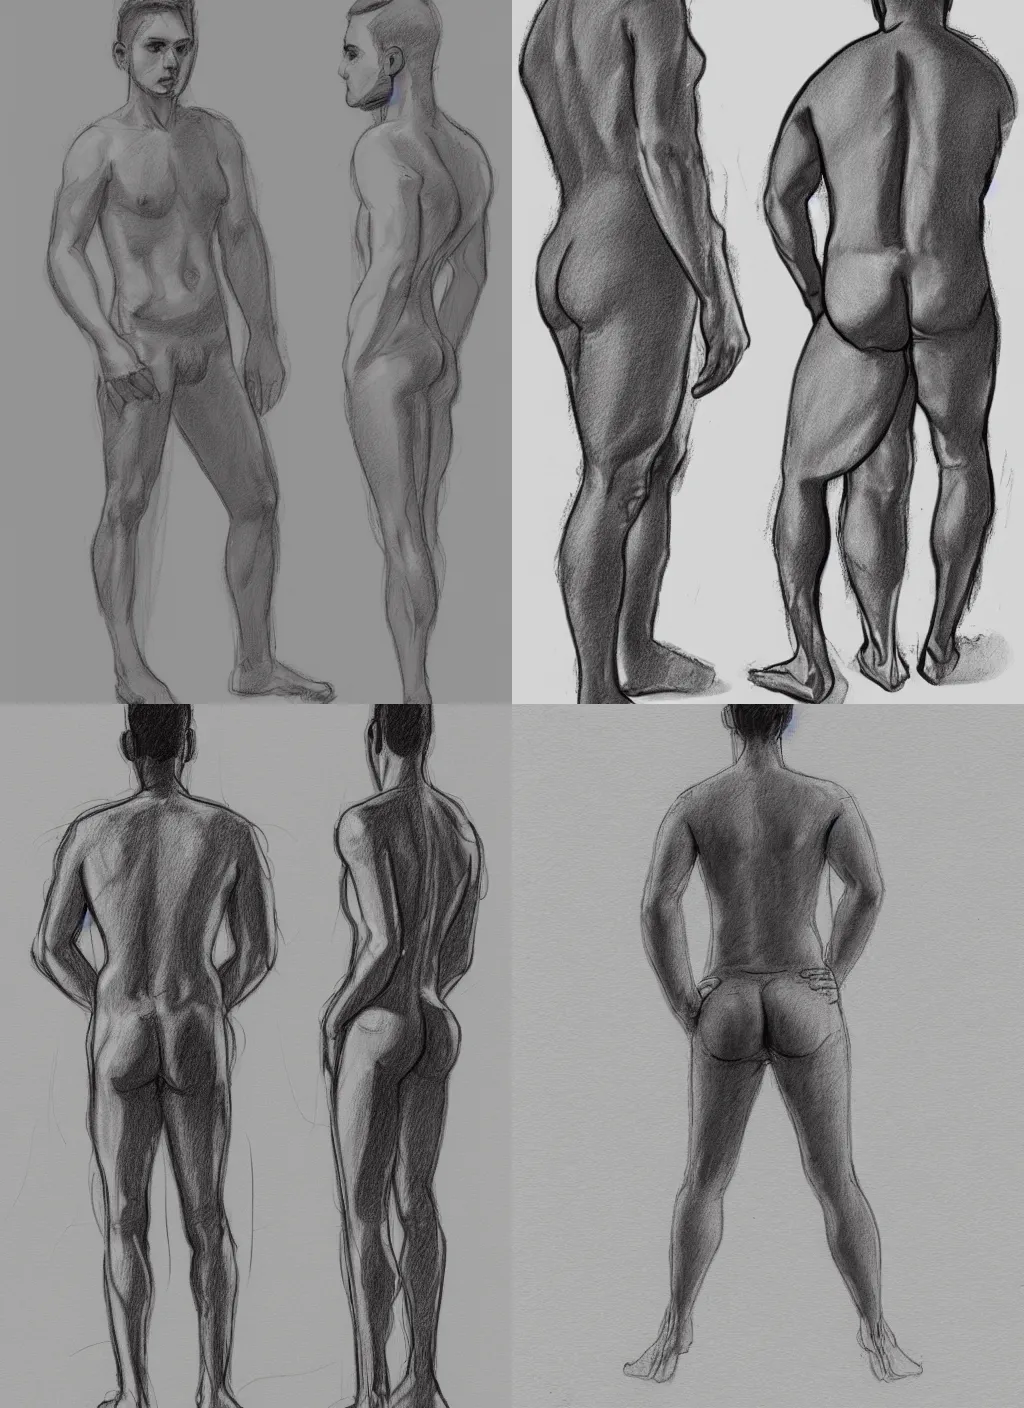 Vektorová grafika „Male body. Hand drawn male body set. Men body front and  back view isolated vector illustration. Male naked full length figure sketch  drawing. Part of set.“ ze služby Stock |